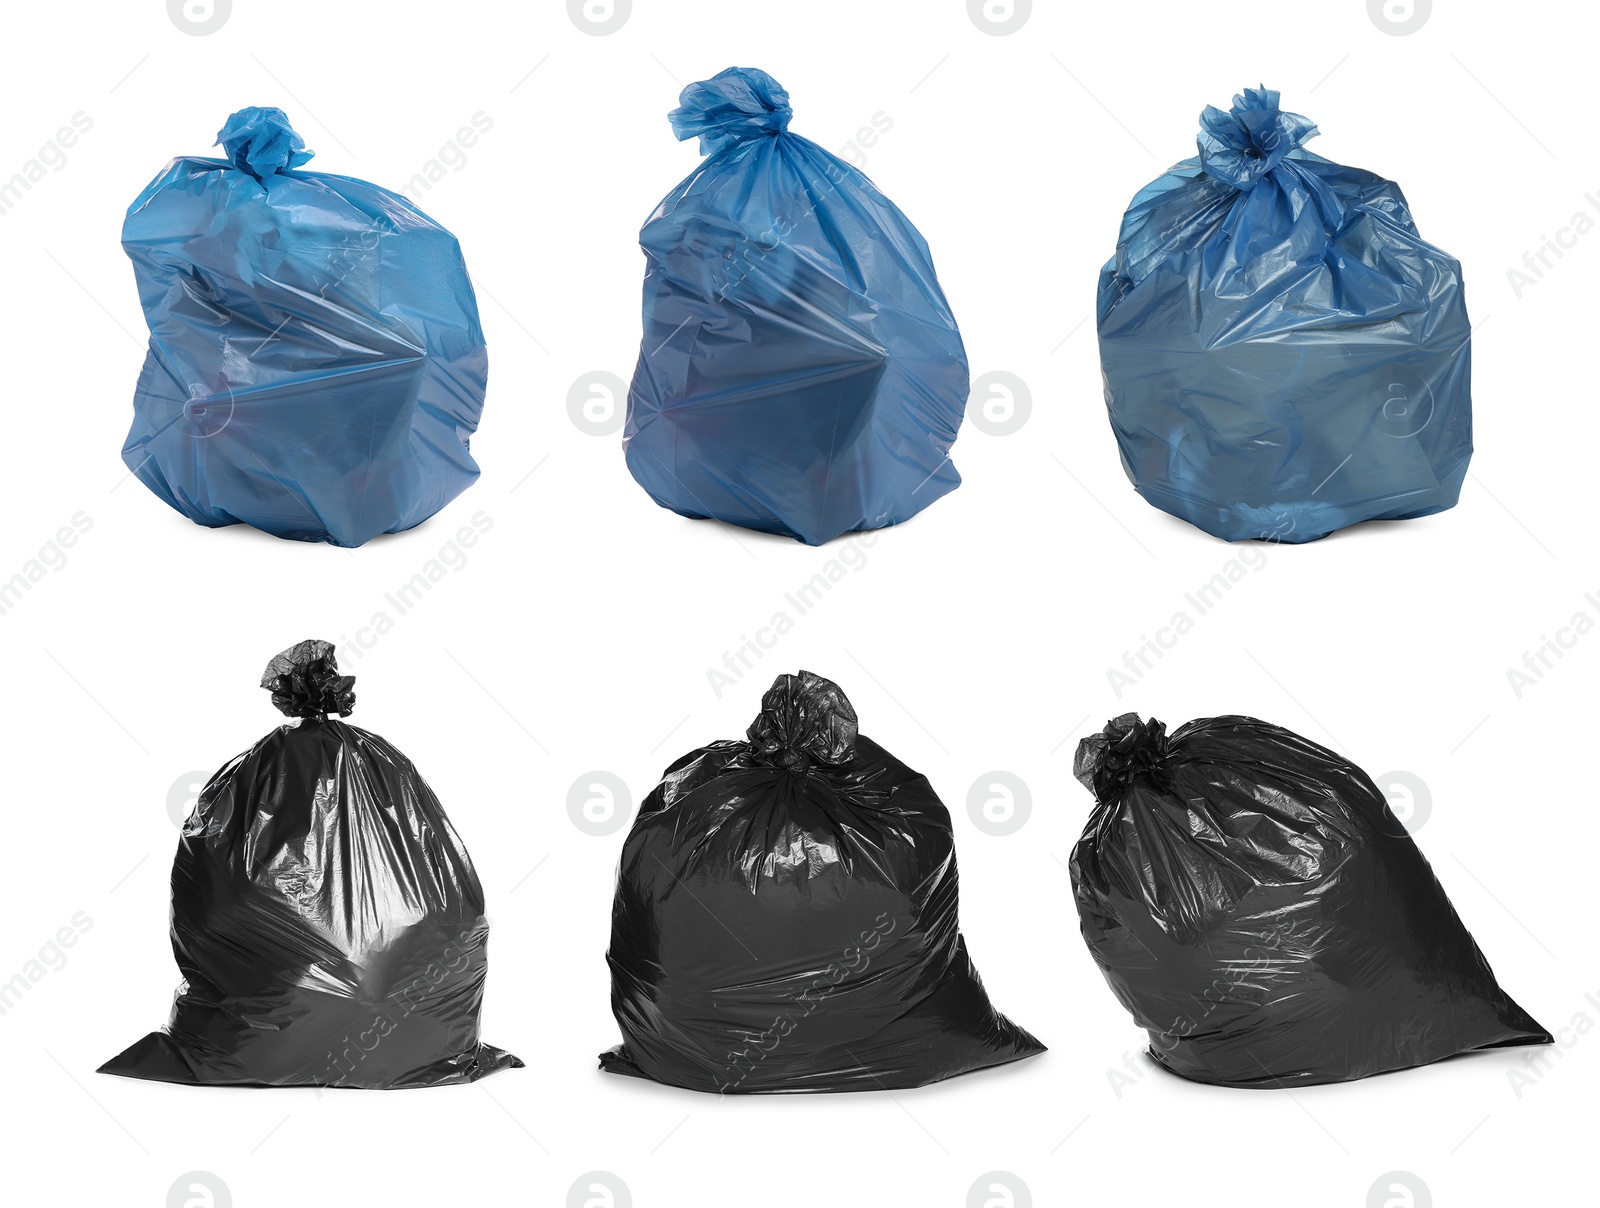 Image of Set with trash bags filled with garbage on white background 